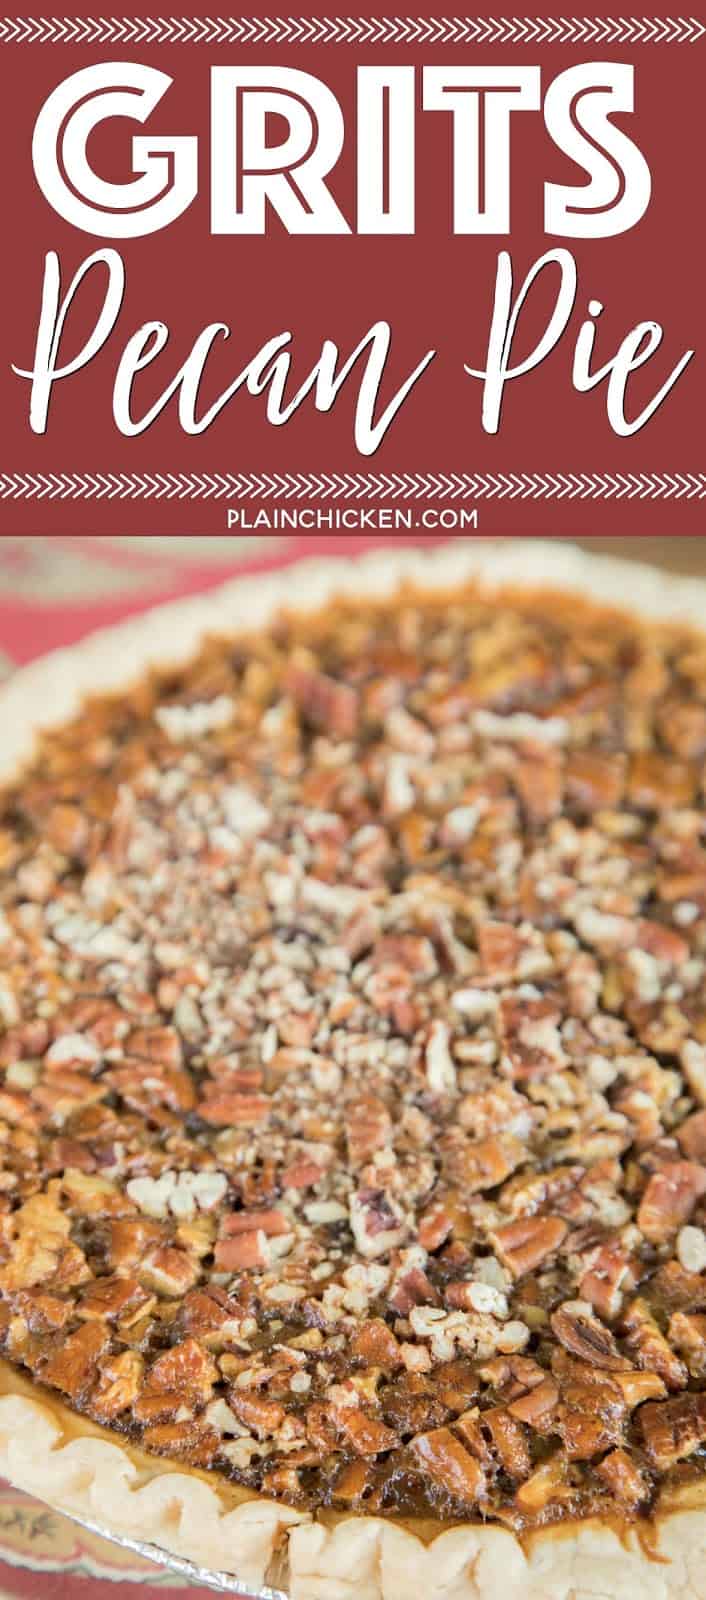 Grits Pecan Pie - CRAZY good!!!! Pecan pie with grits mixed into the filling. Sounds weird, but this is THE BEST pecan pie EVER!! Everyone raves about this pie! The grits give the filling a good texture - kind of like an oatmeal cookie. Give this a try for your next holiday meal! #pecanpie  #pecanpierecipe #dessertrecipe #pierecipe #thanksgiving #gritsrecipe #thanksgivingrecipe #christmas #christmasrecipe #grits